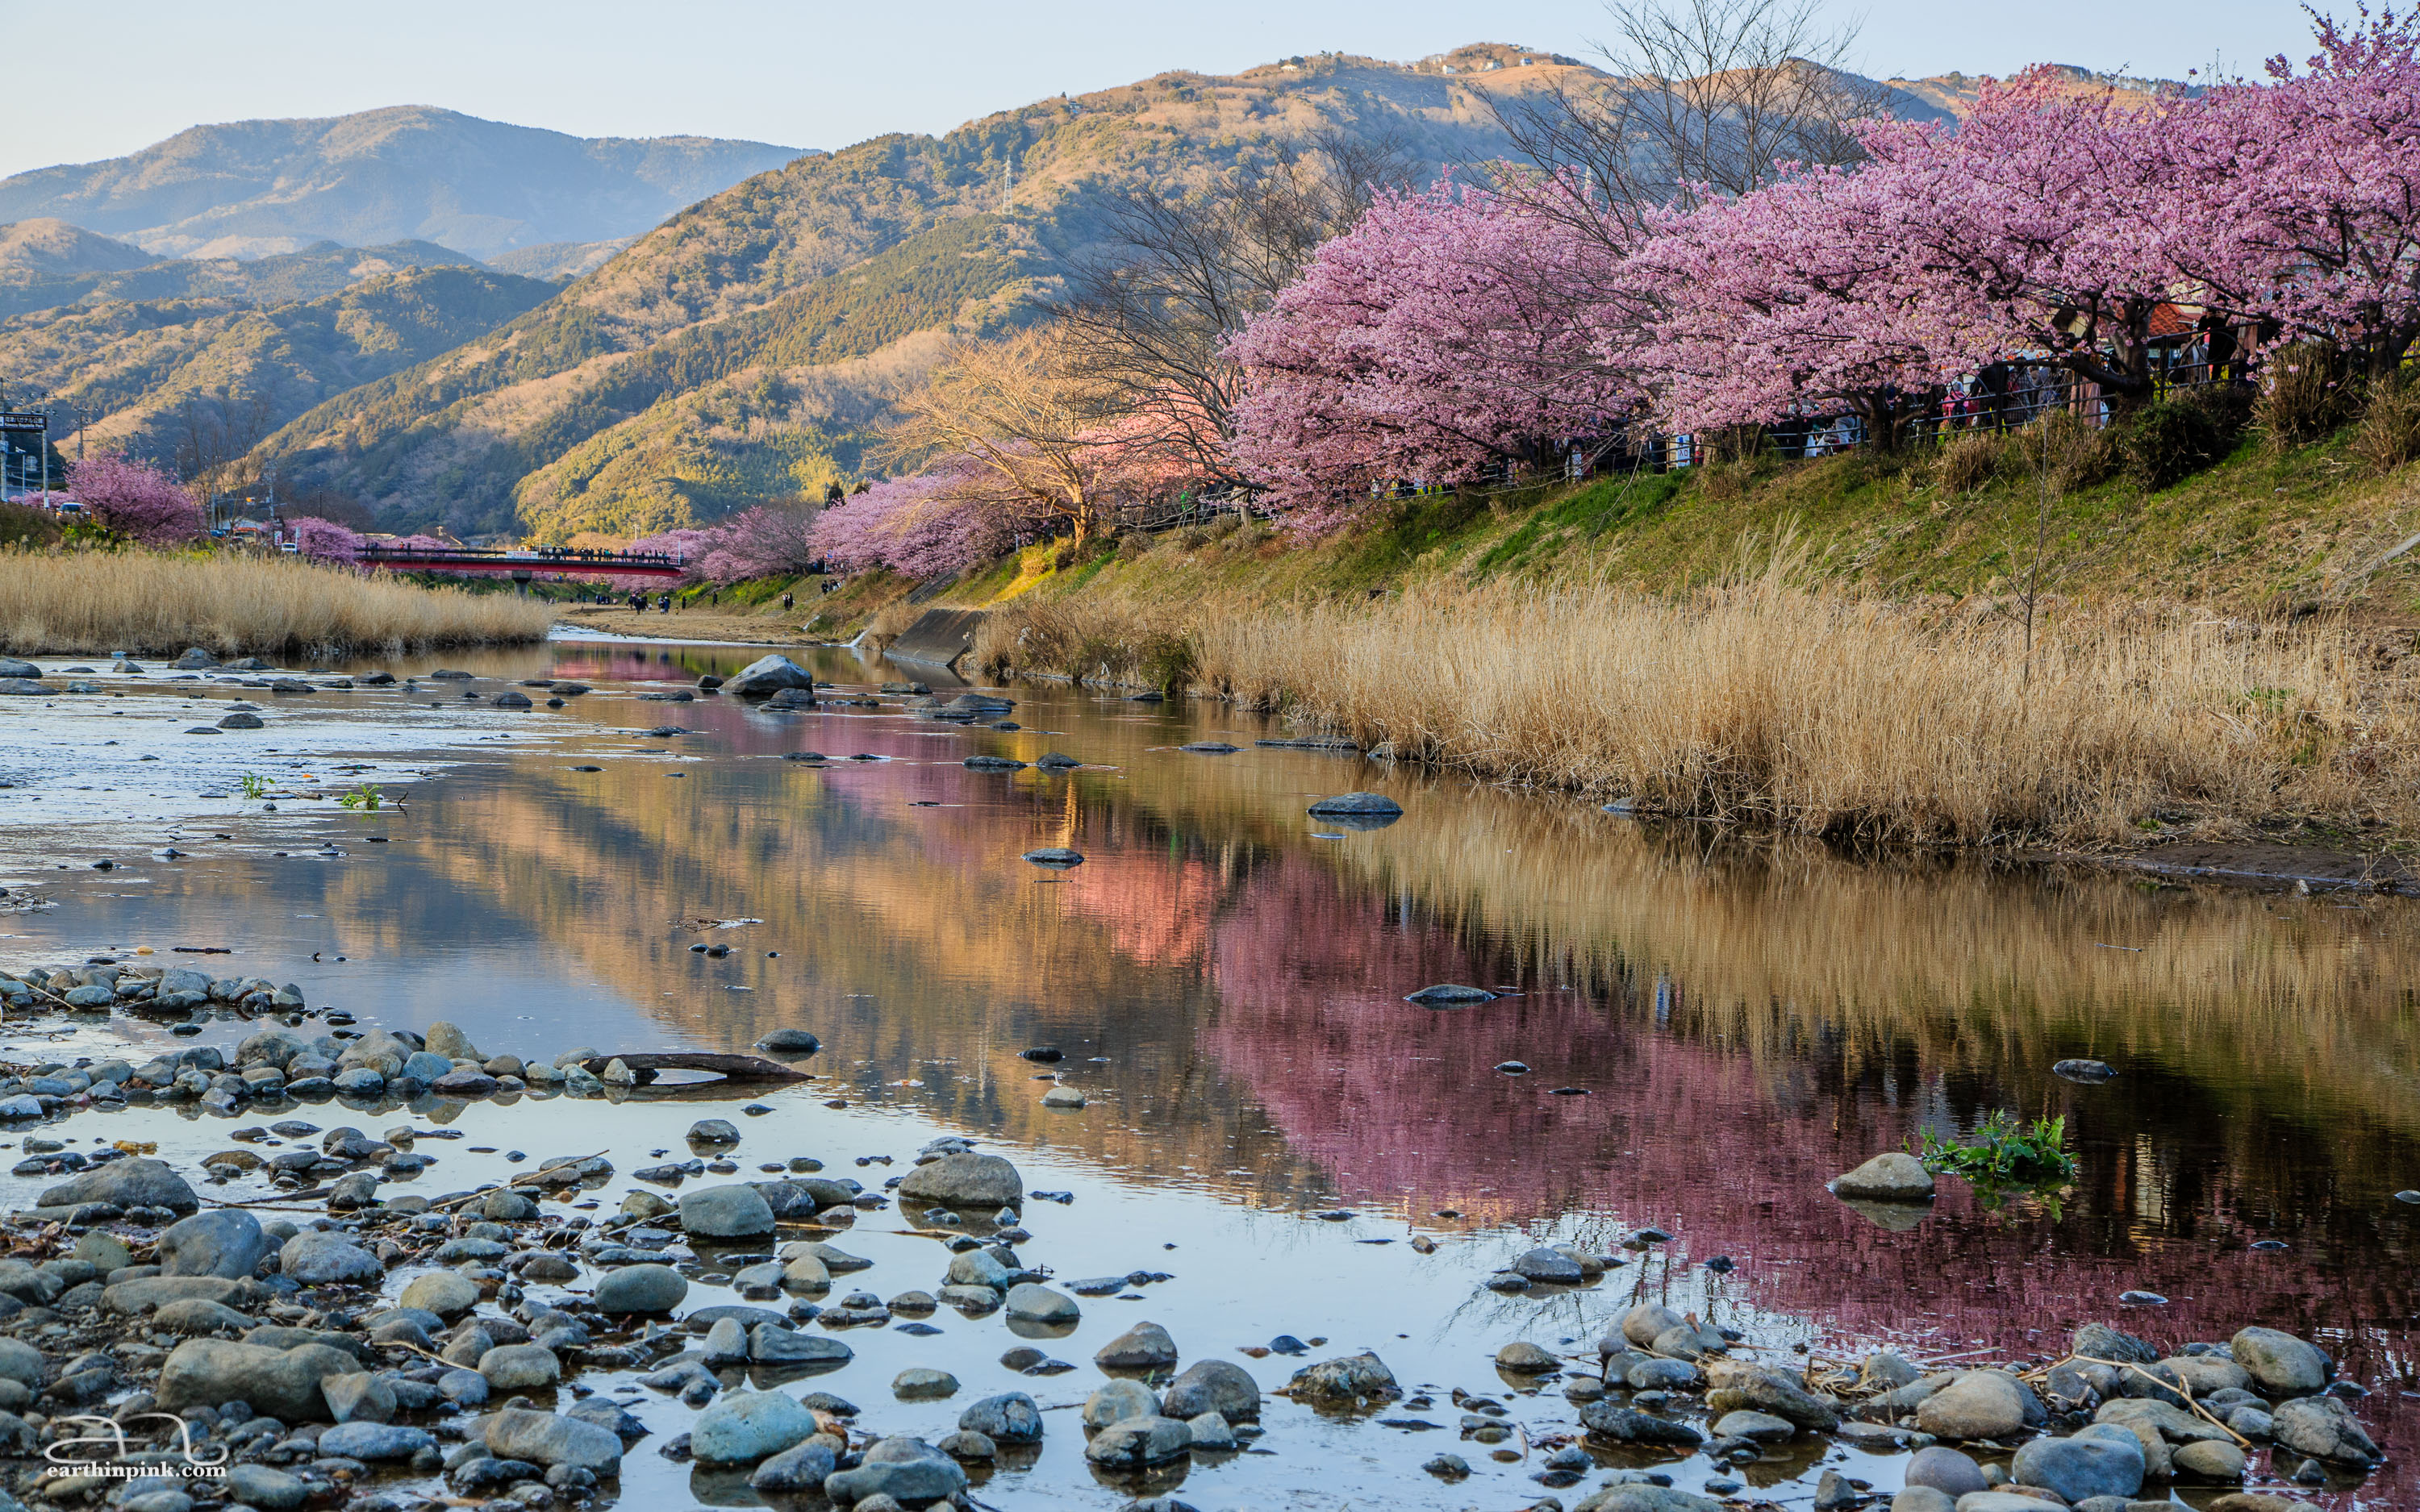 Early blooming Kawazu-zakura trees along the river at sunset. If you're in Tokyo too early for the usual sakura viewing season, consider a day trip to Izu!